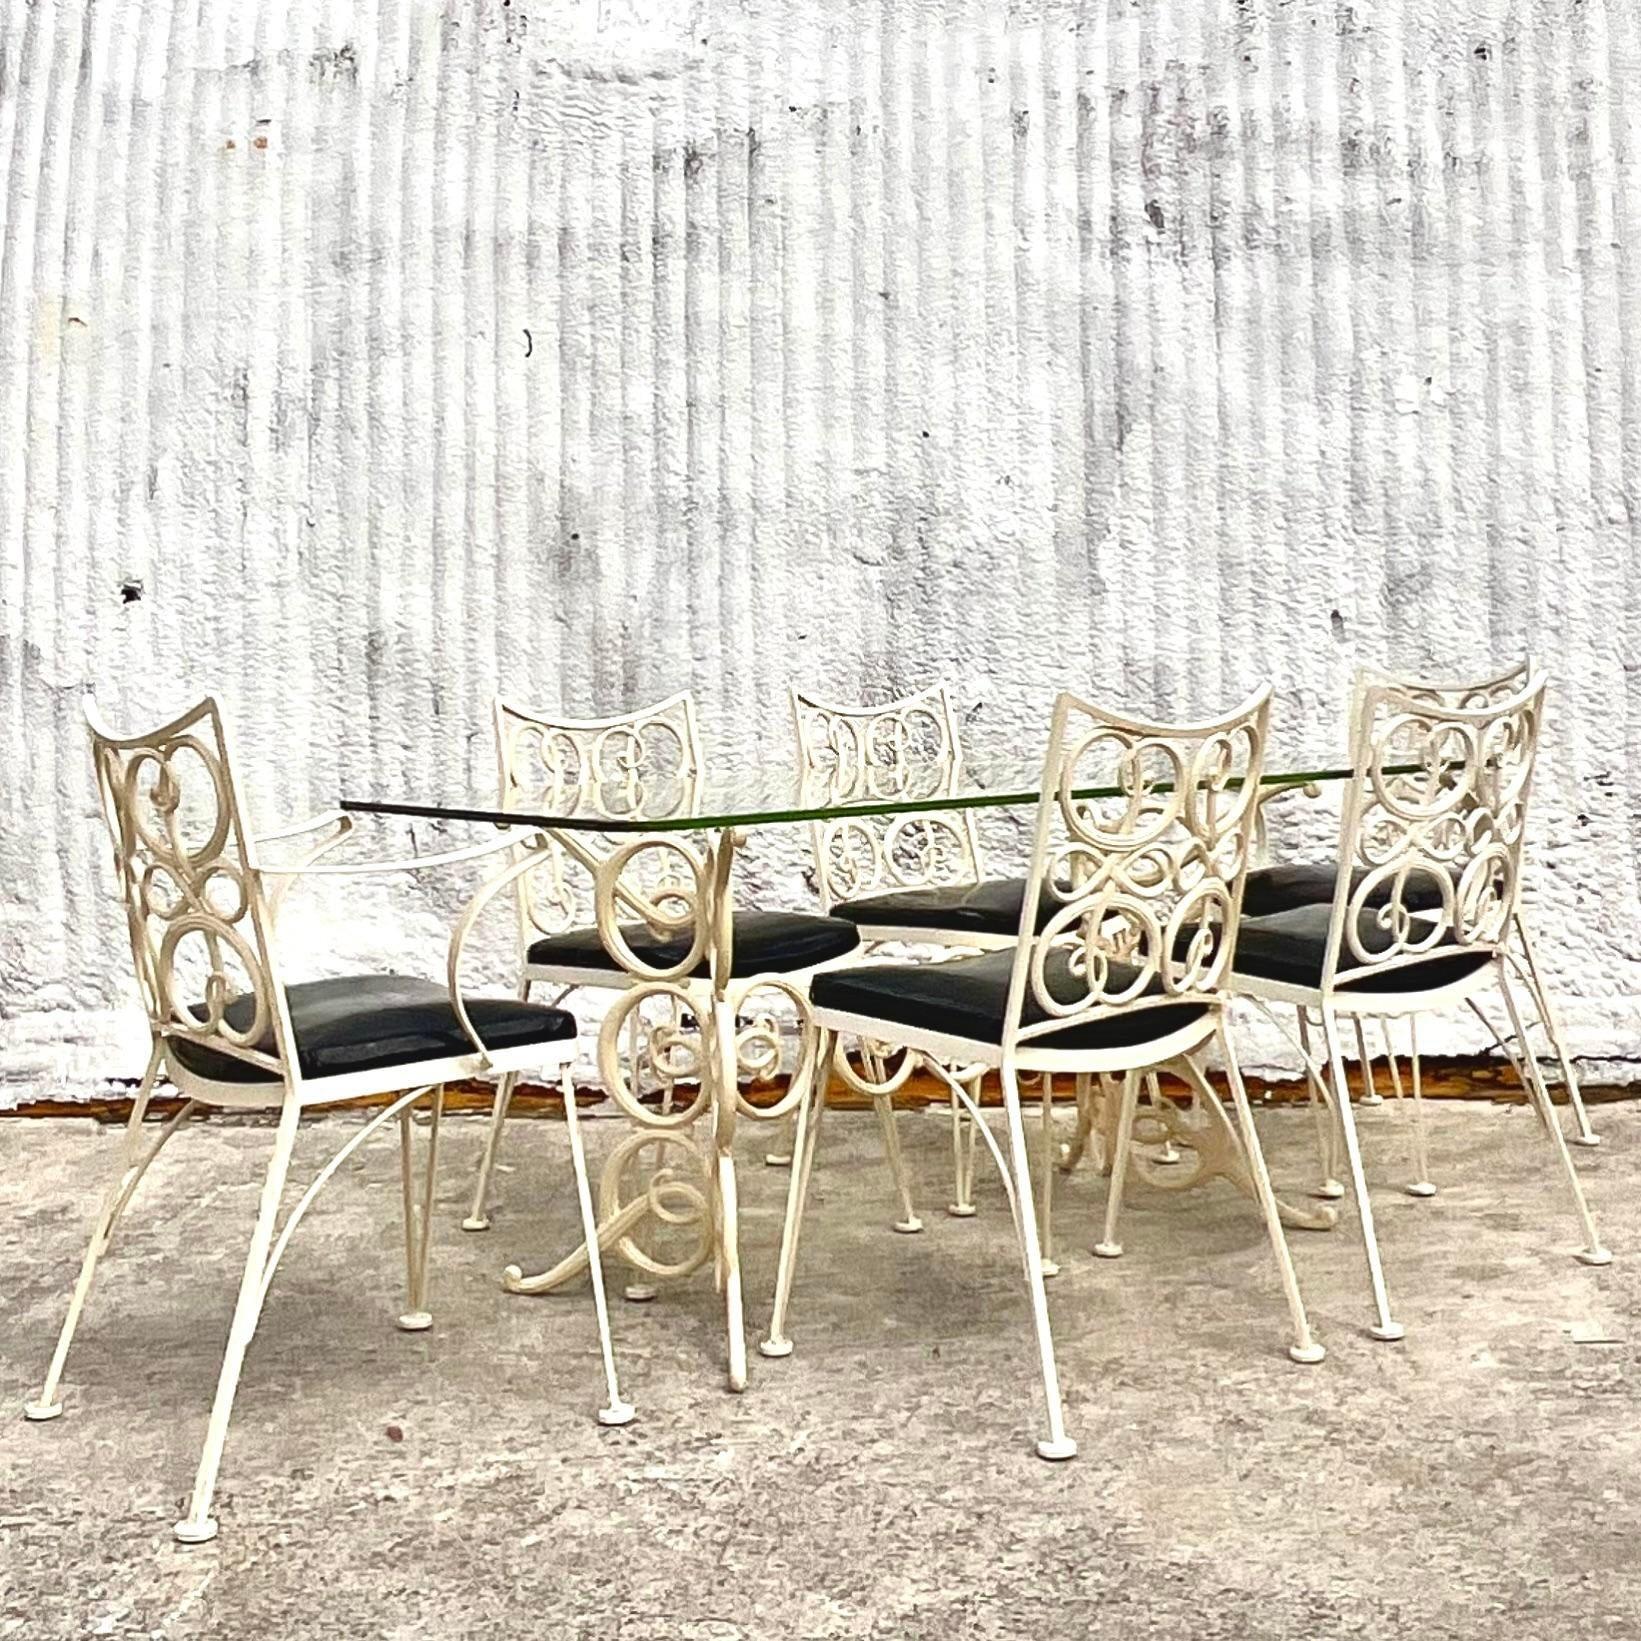 Mid 20th Century Vintage Signed Russel Woodard Wrought Iron Table & 6 Chairs For Sale 3